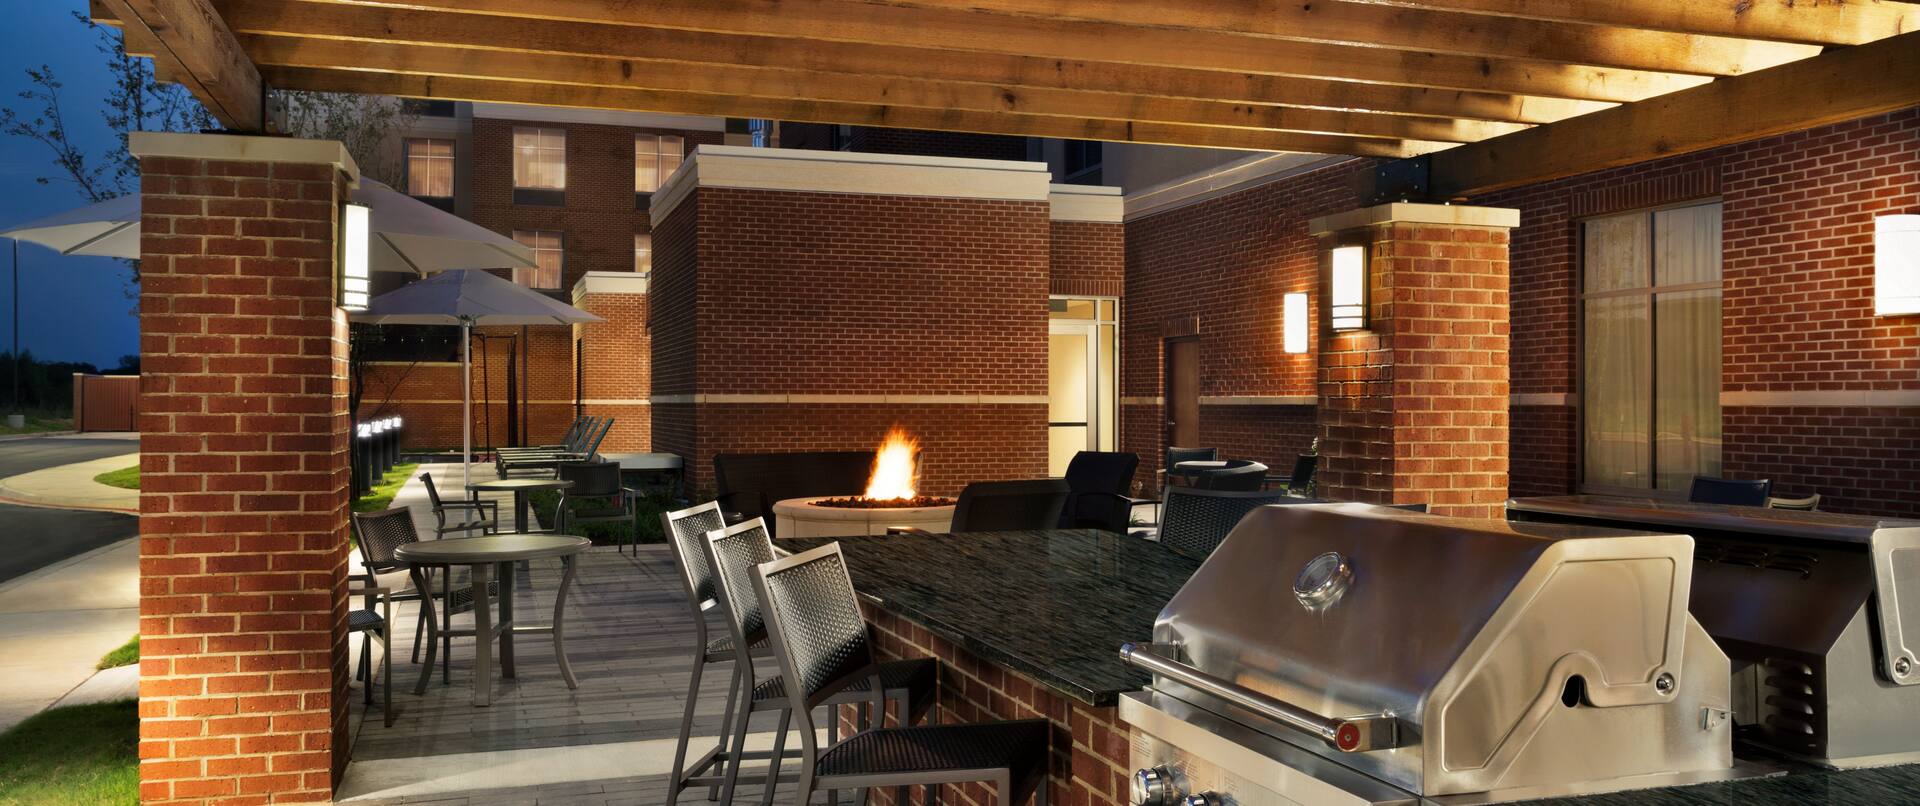 Outdoor BBQ Grill Area at Night